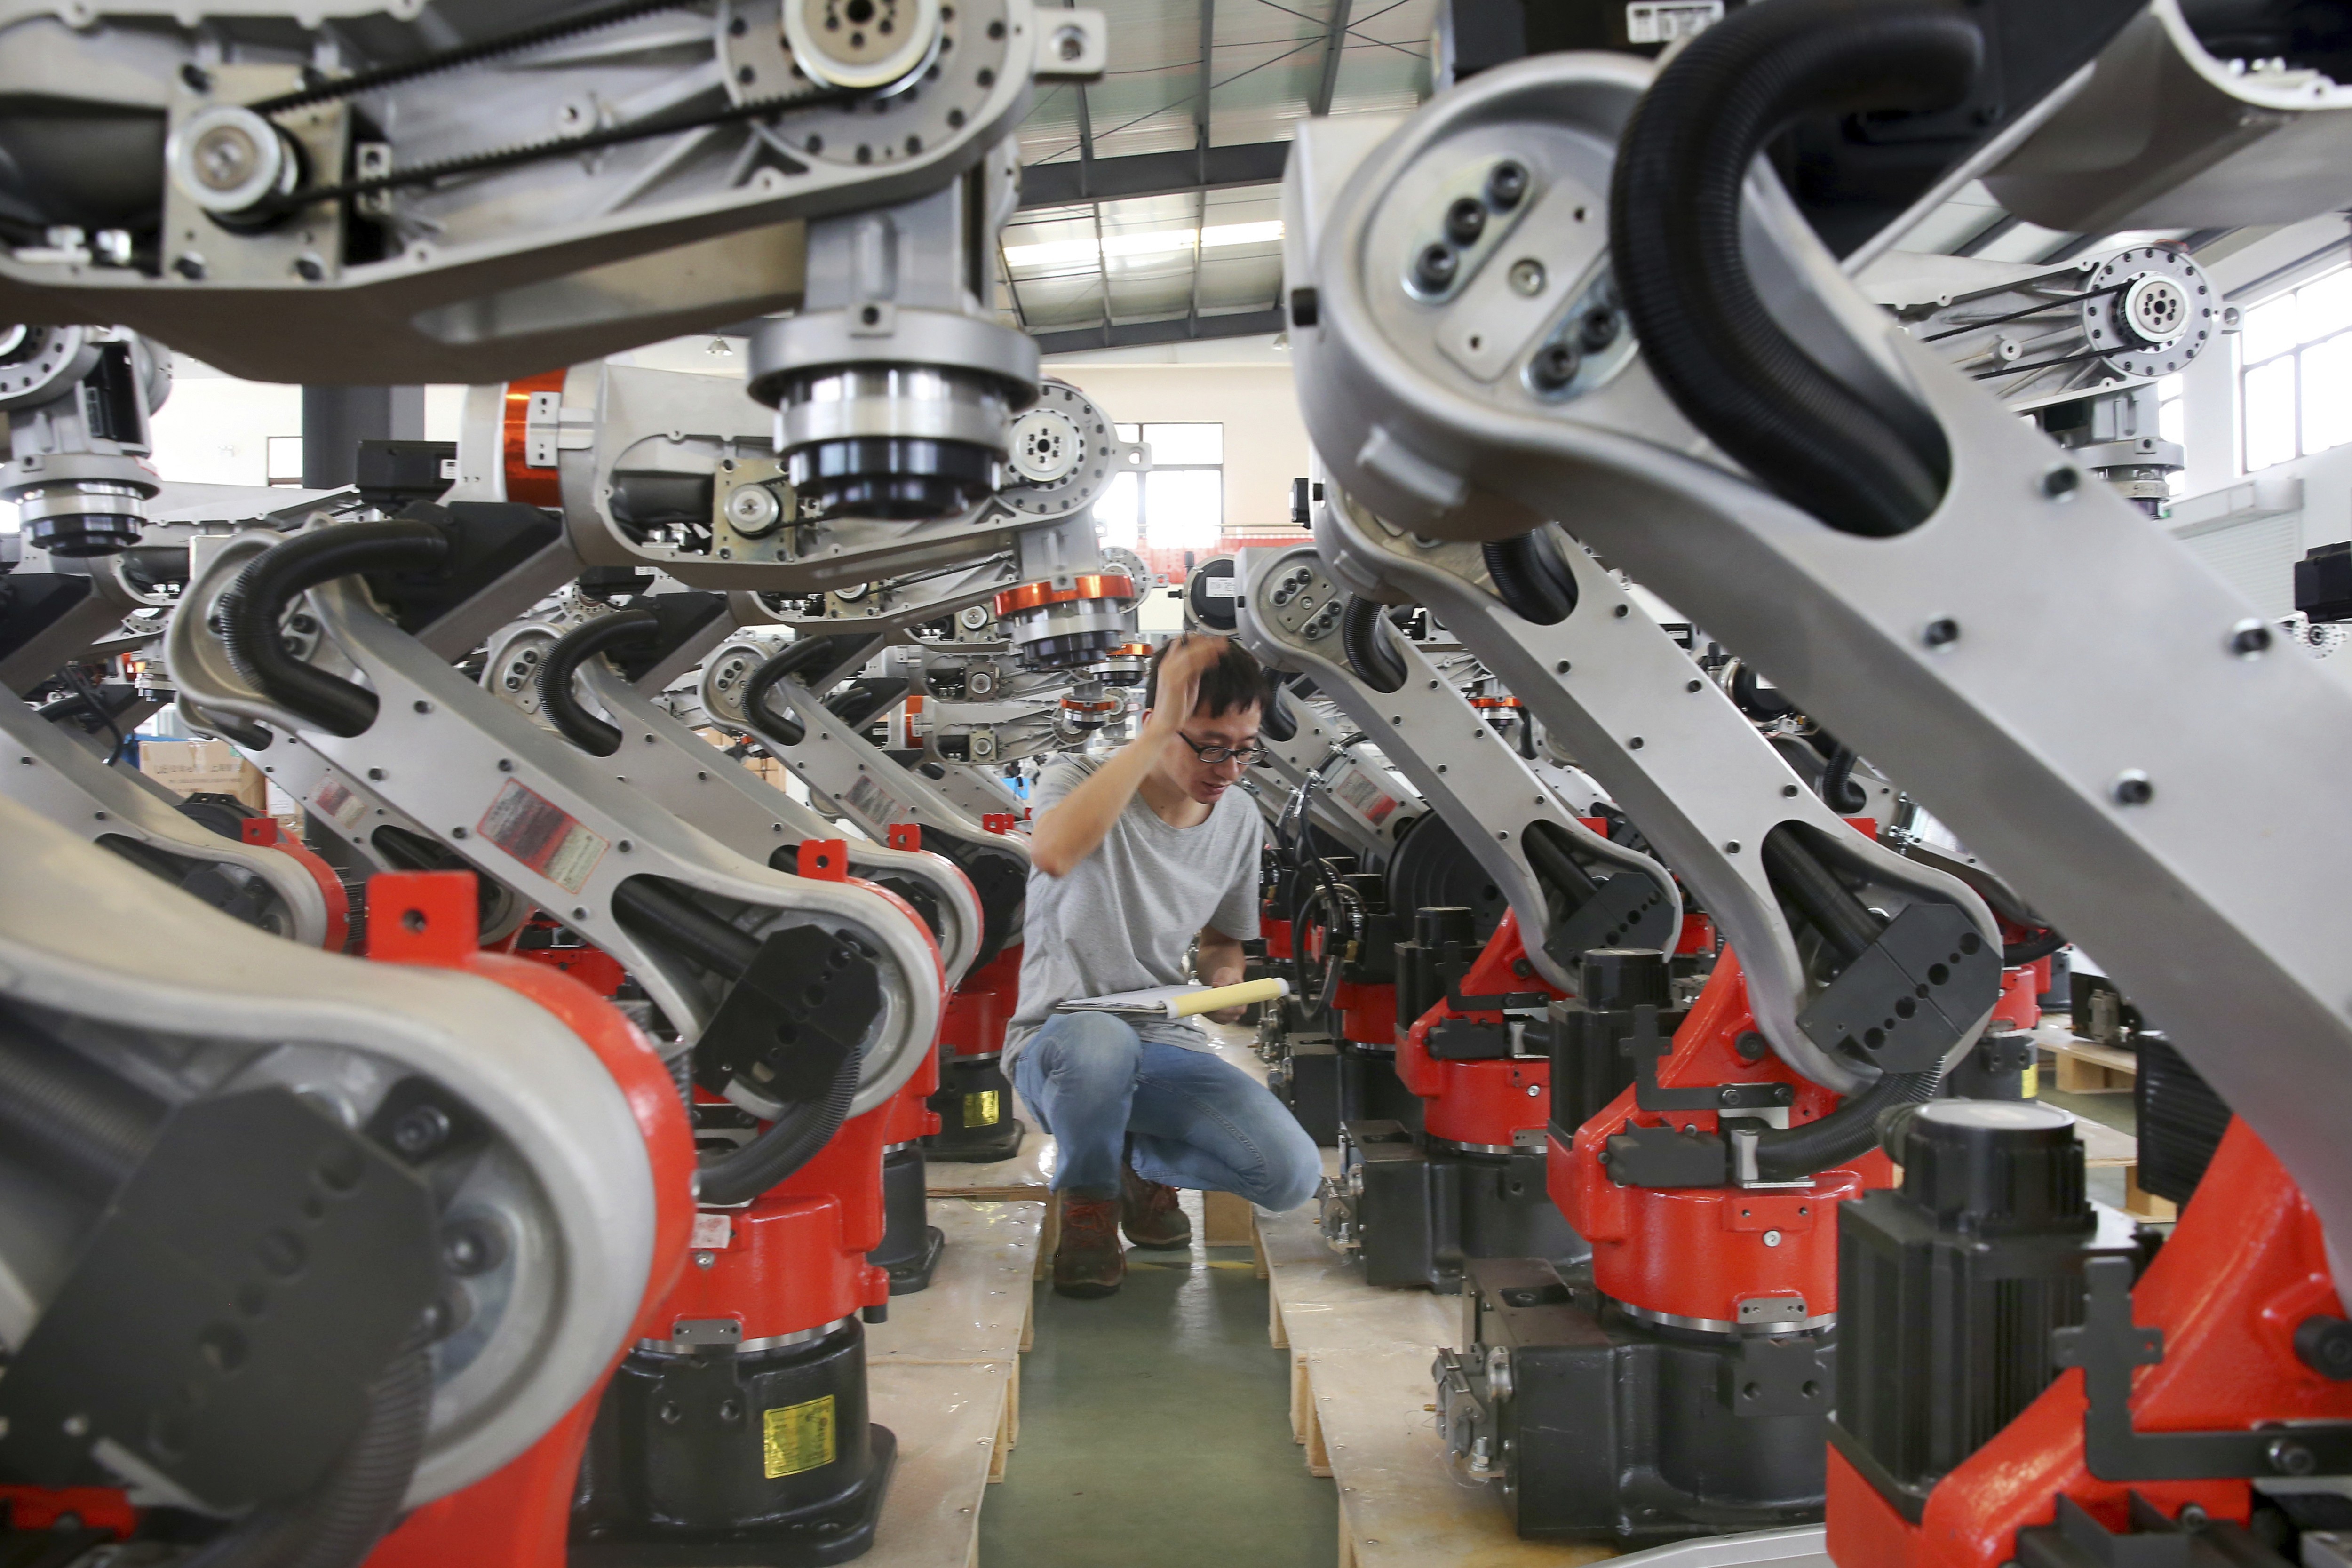 Checks are carried out on robotic arms at a factory producing industrial robots in Zhengyu town, in east China’s Jiangsu province. As China gets ready for a key Communist Party core committee meeting in October, policymakers are likely to increasingly prioritise manufacturing. Photo: AP